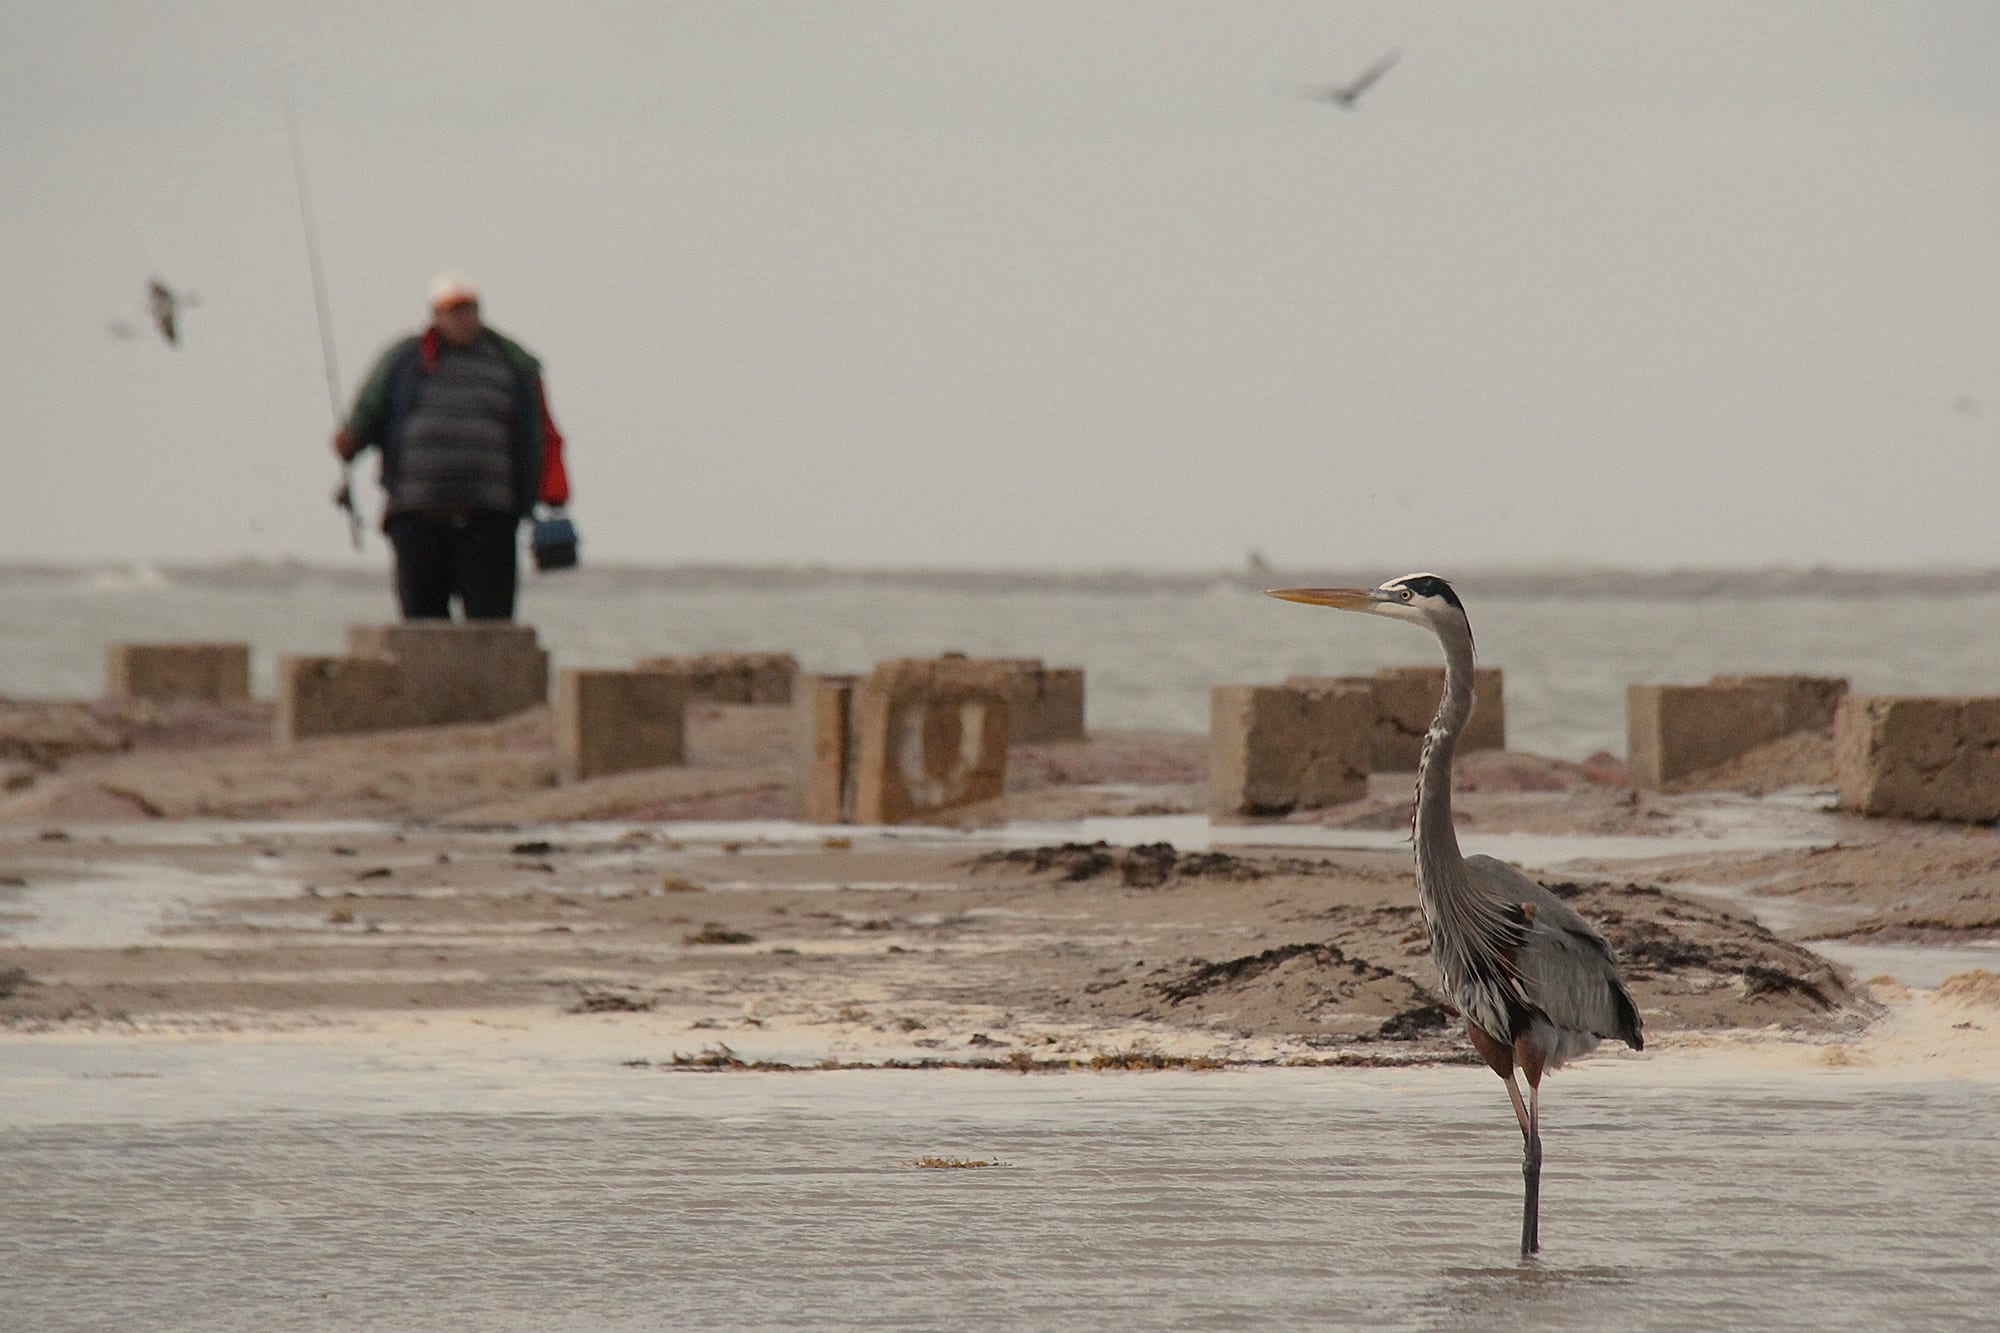 A fisherman watches a great blue heron